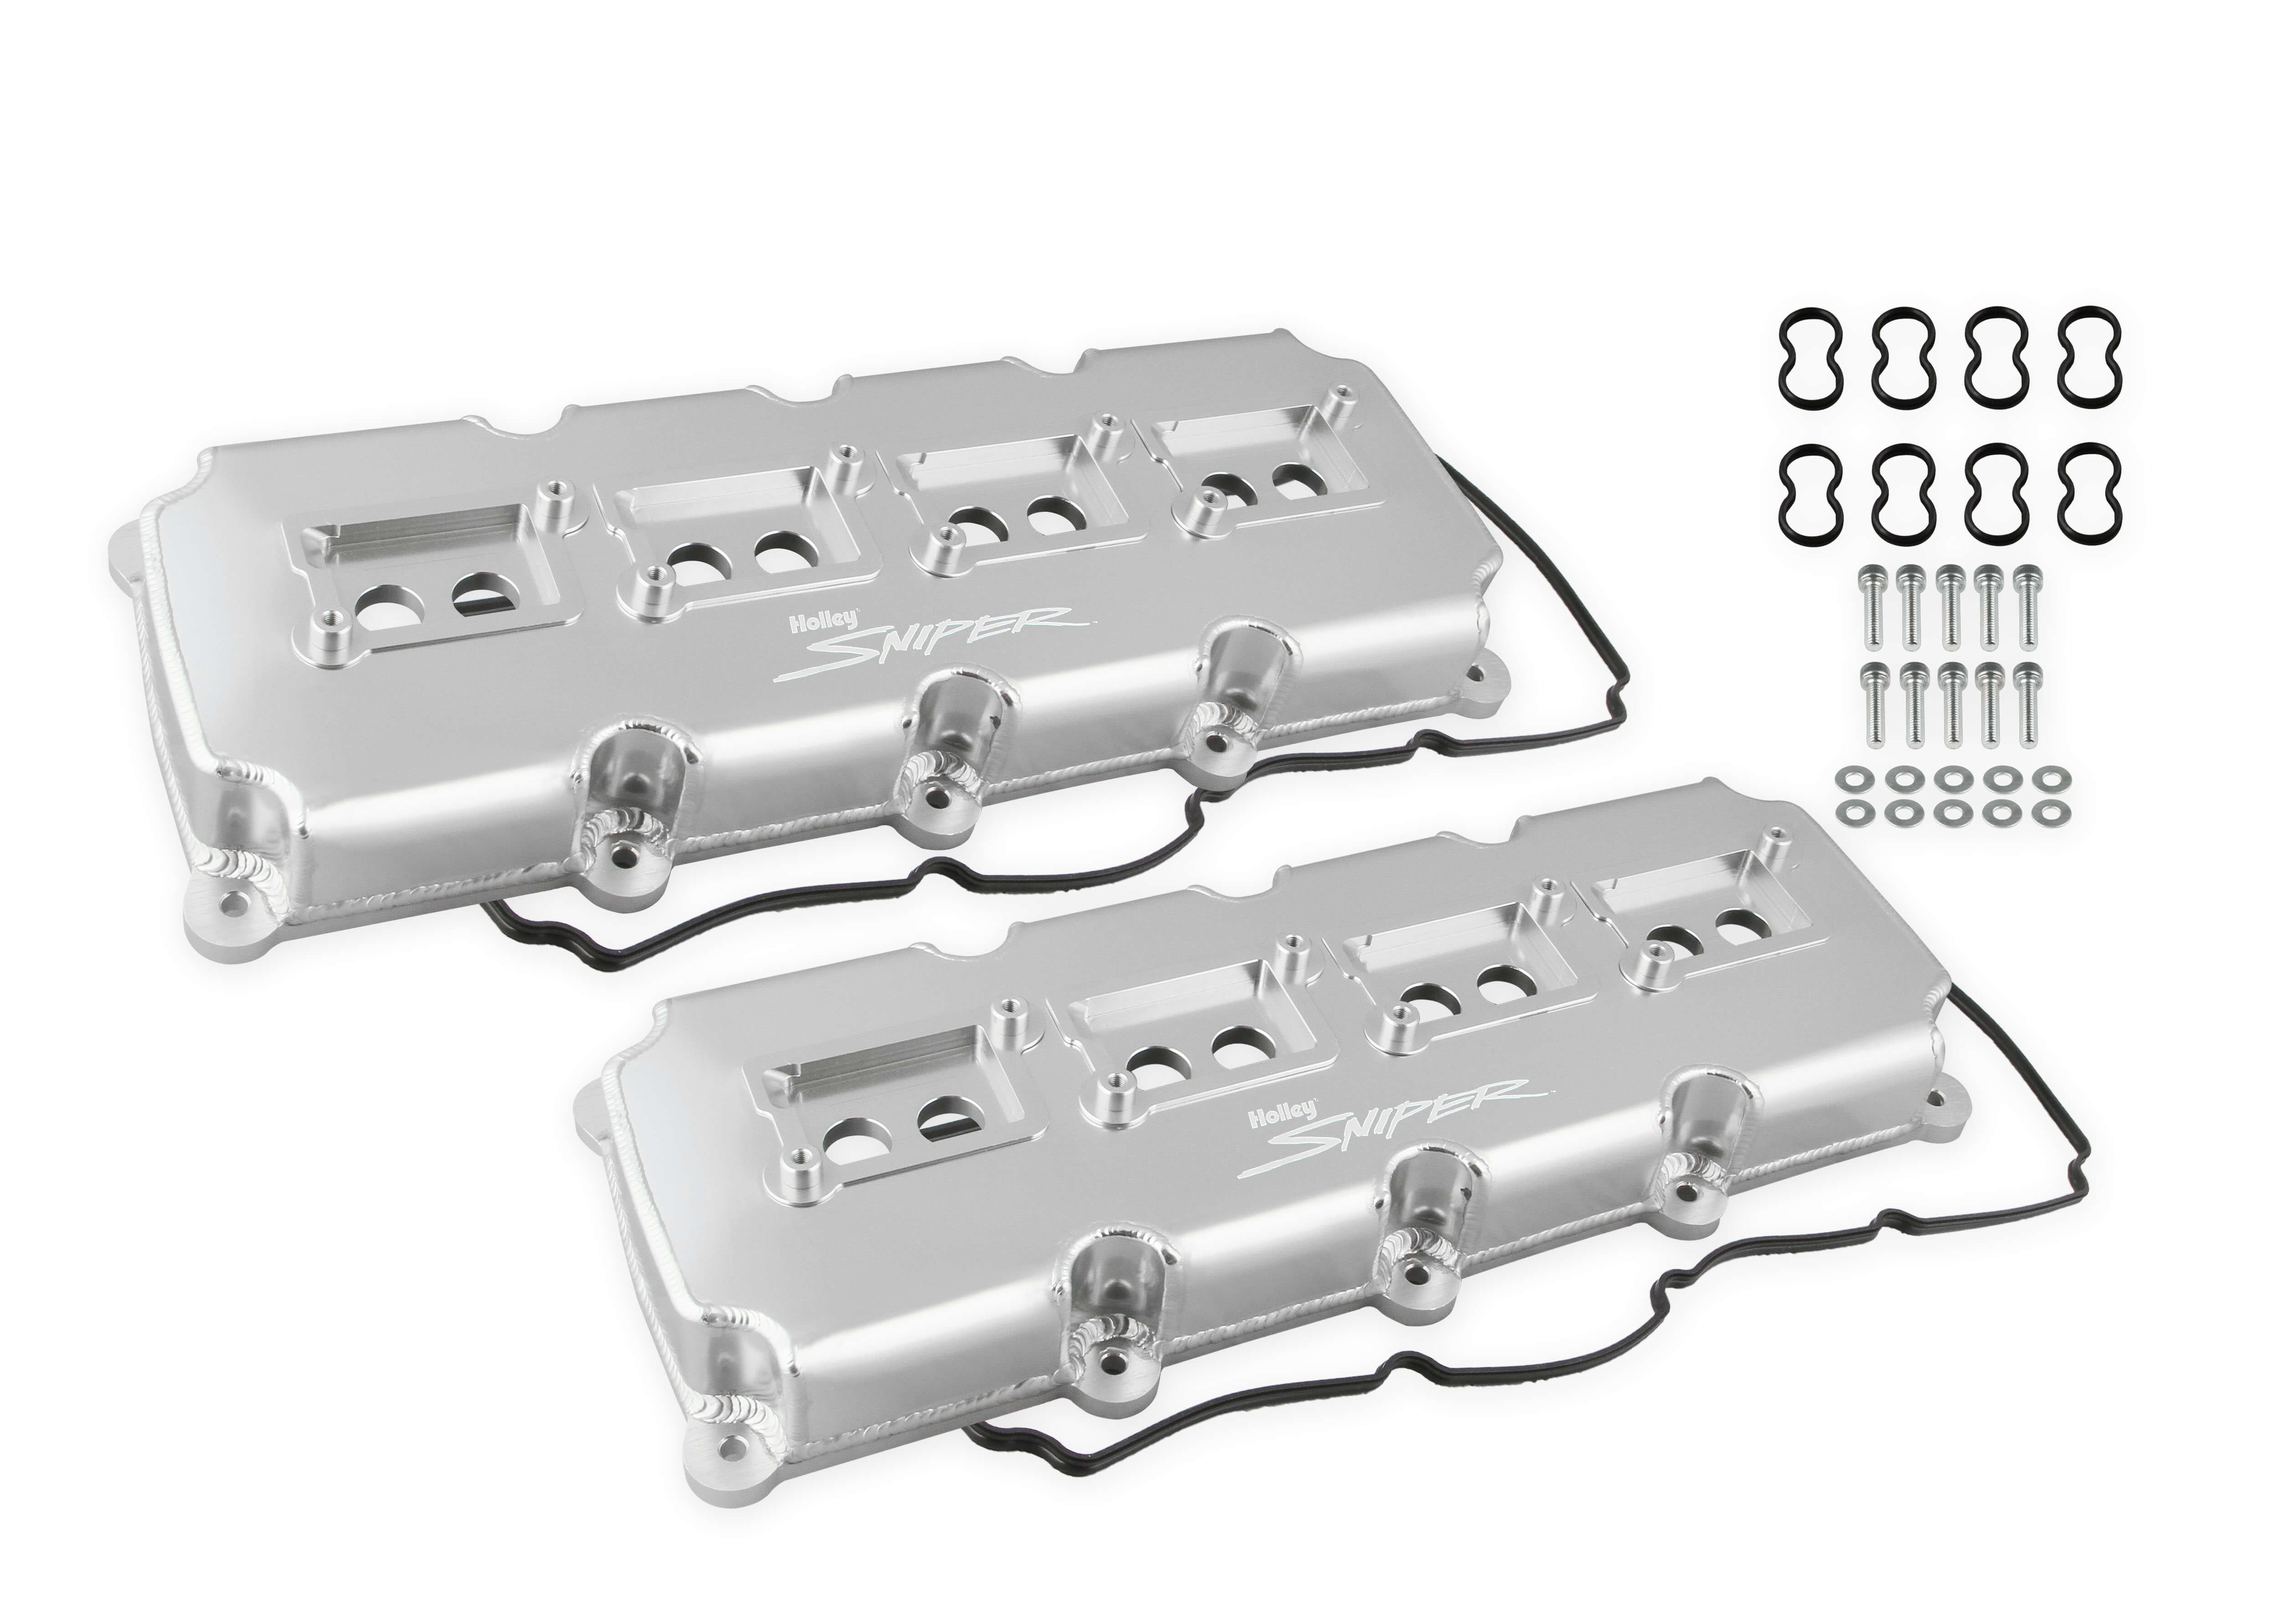 DISCONTINUED Holley Sniper Fabricated Valve Covers in Silver for 5.7/6.1/6.4L Gen III Hemi - 890015 Questions & Answers